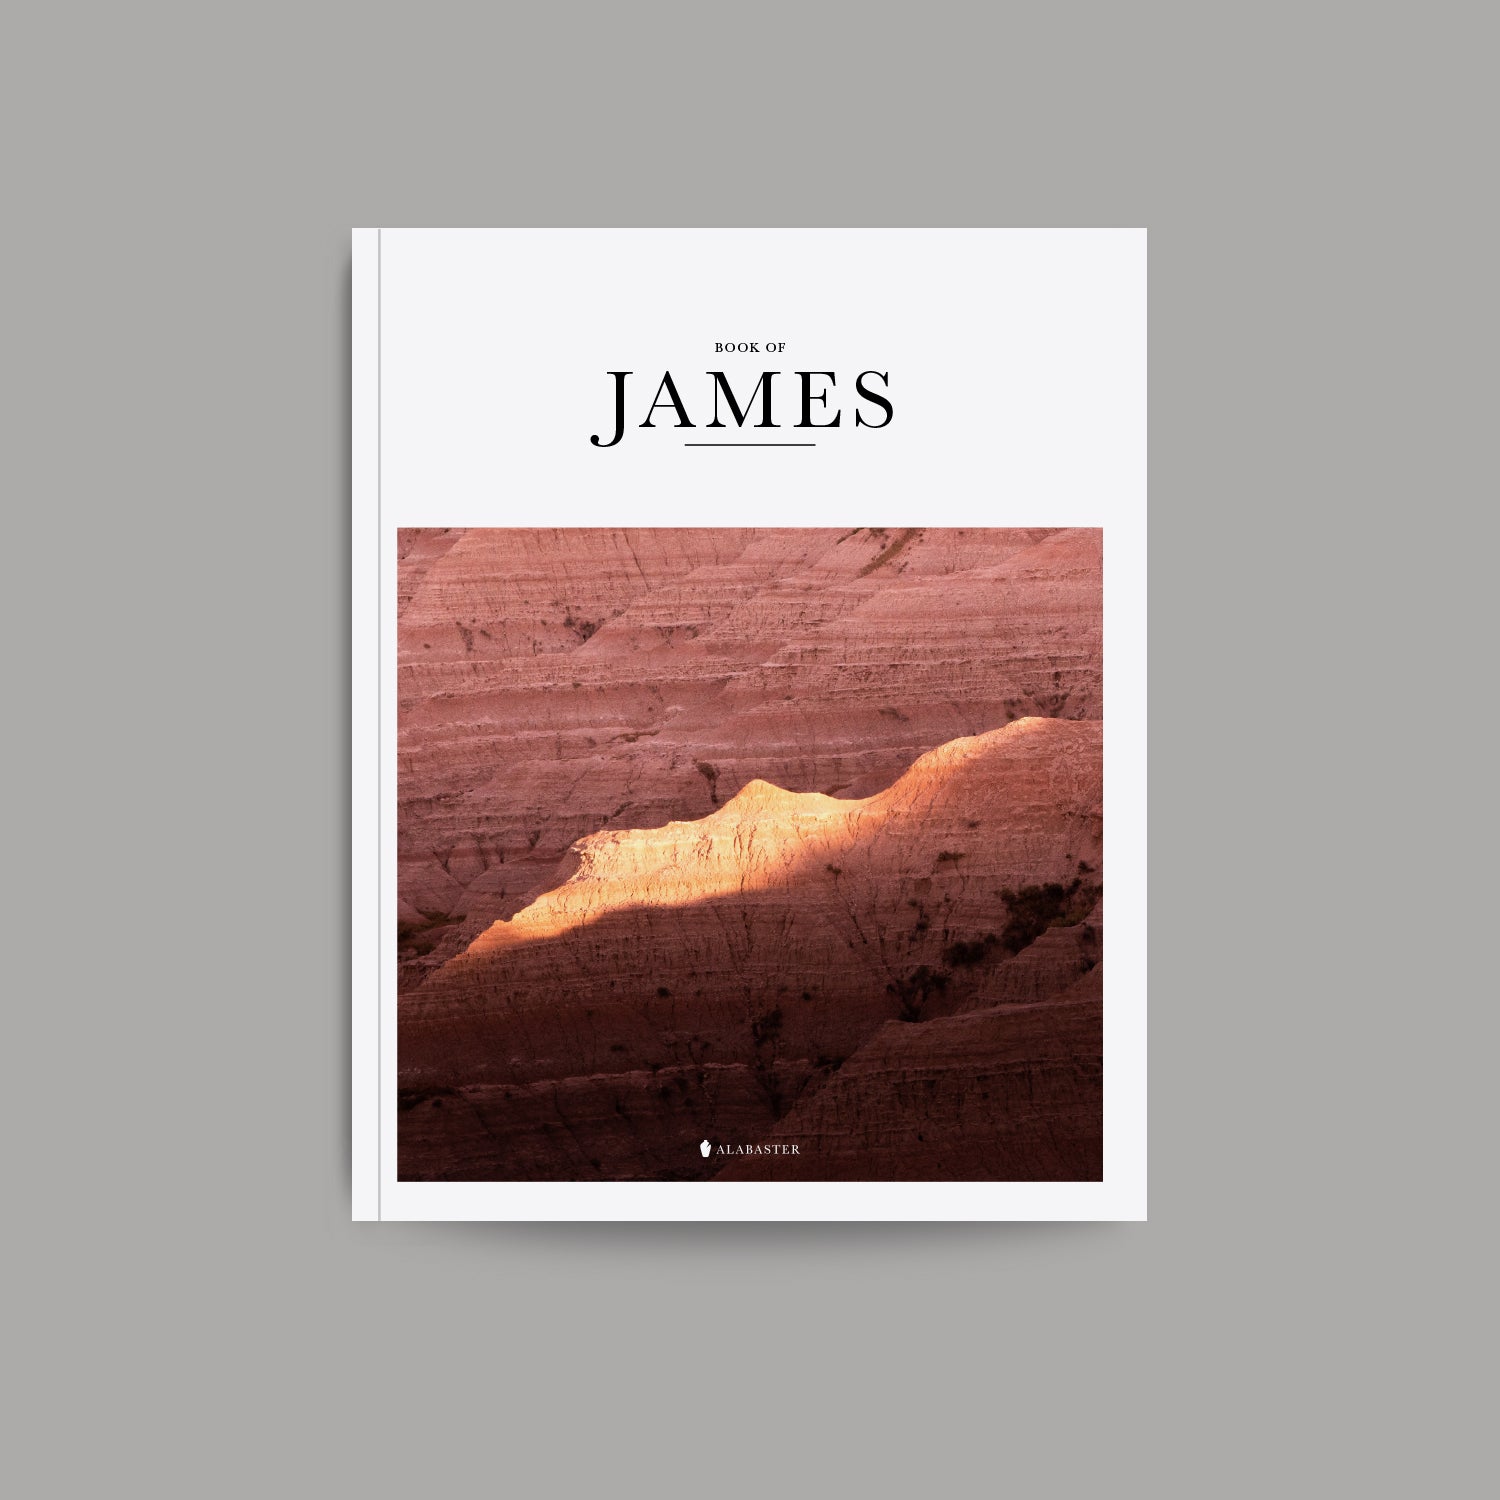 The Book of James softcover